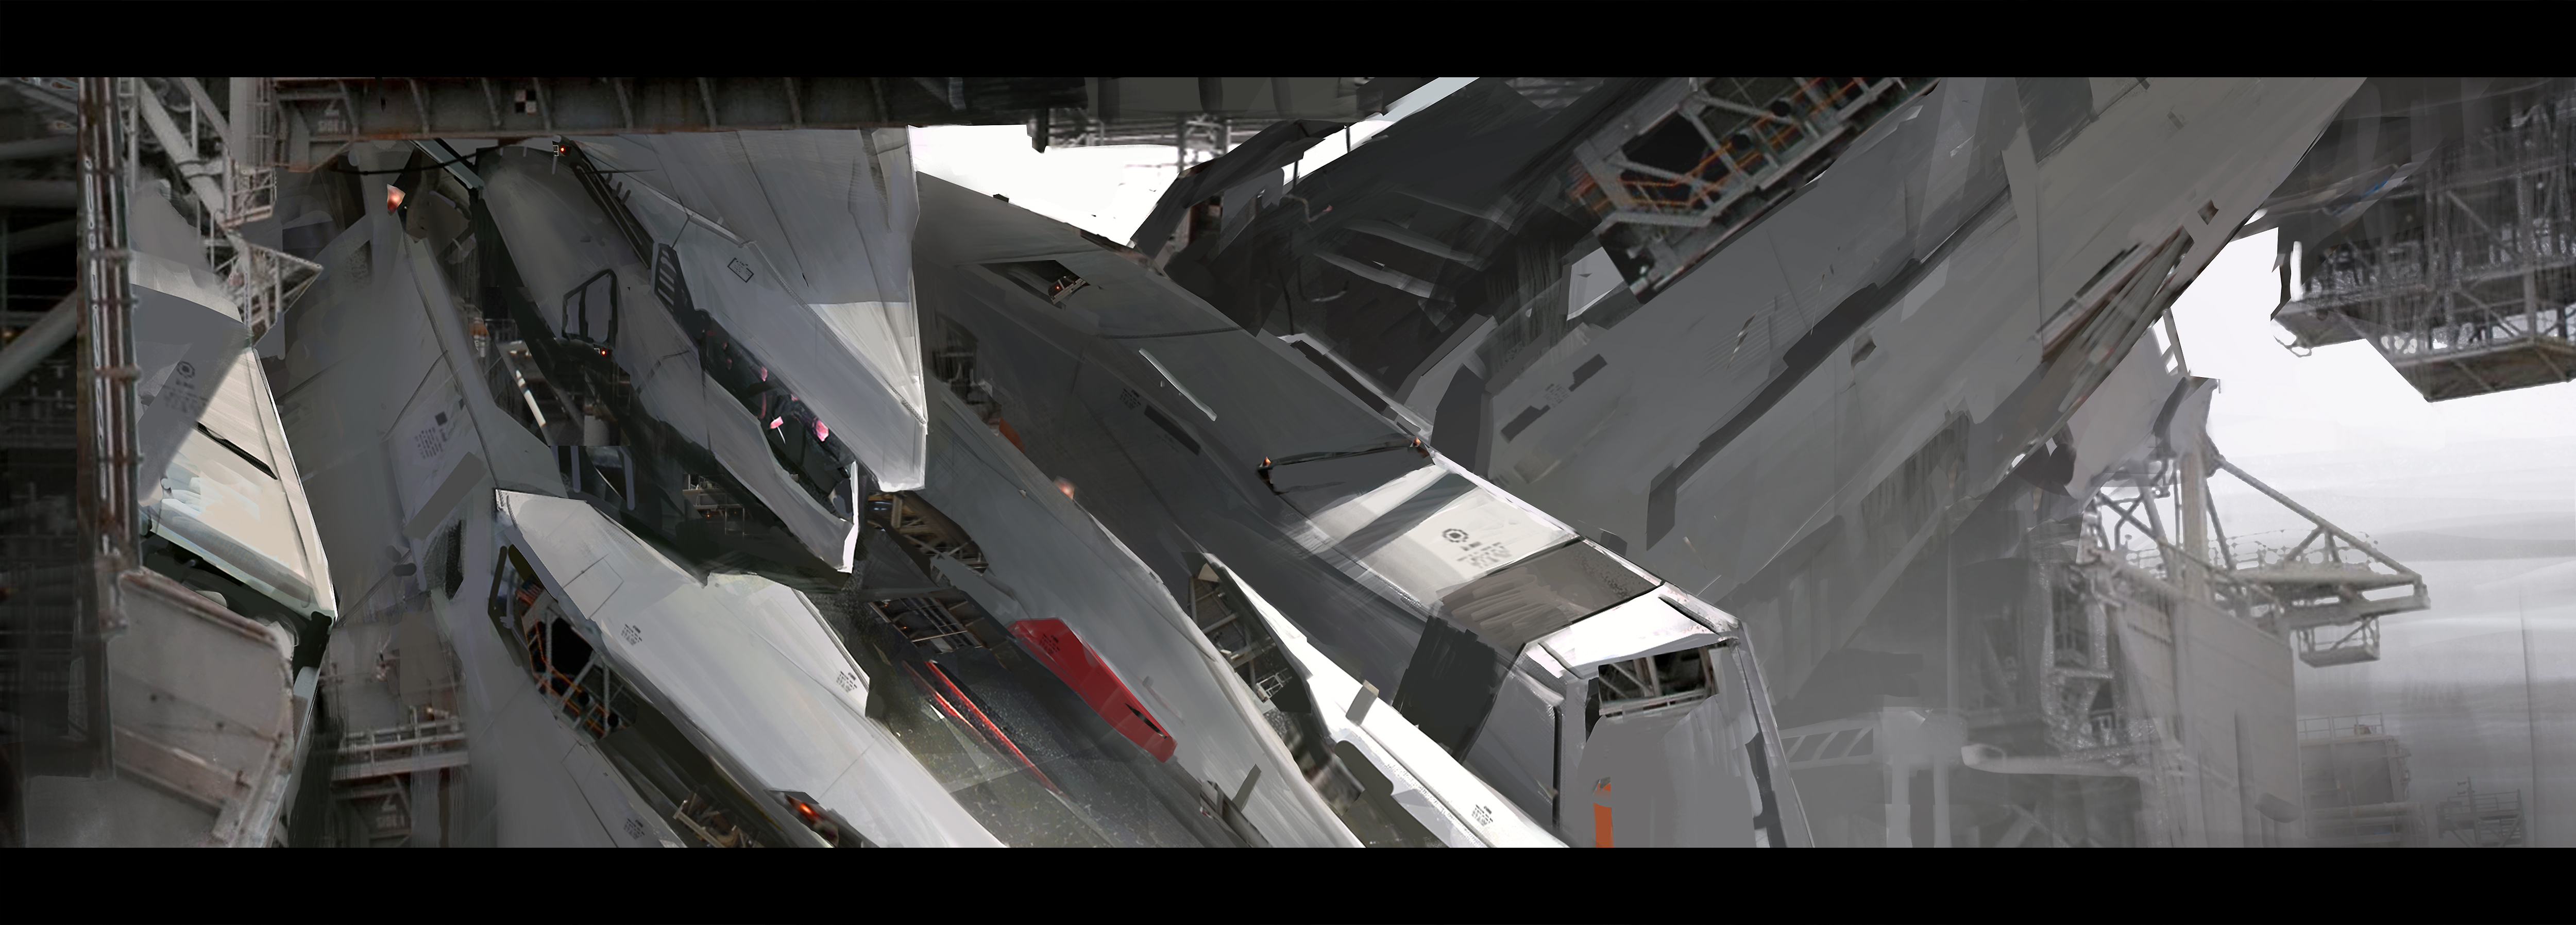 Cell Artist Robot Science Fiction Armored Core 5000x1795